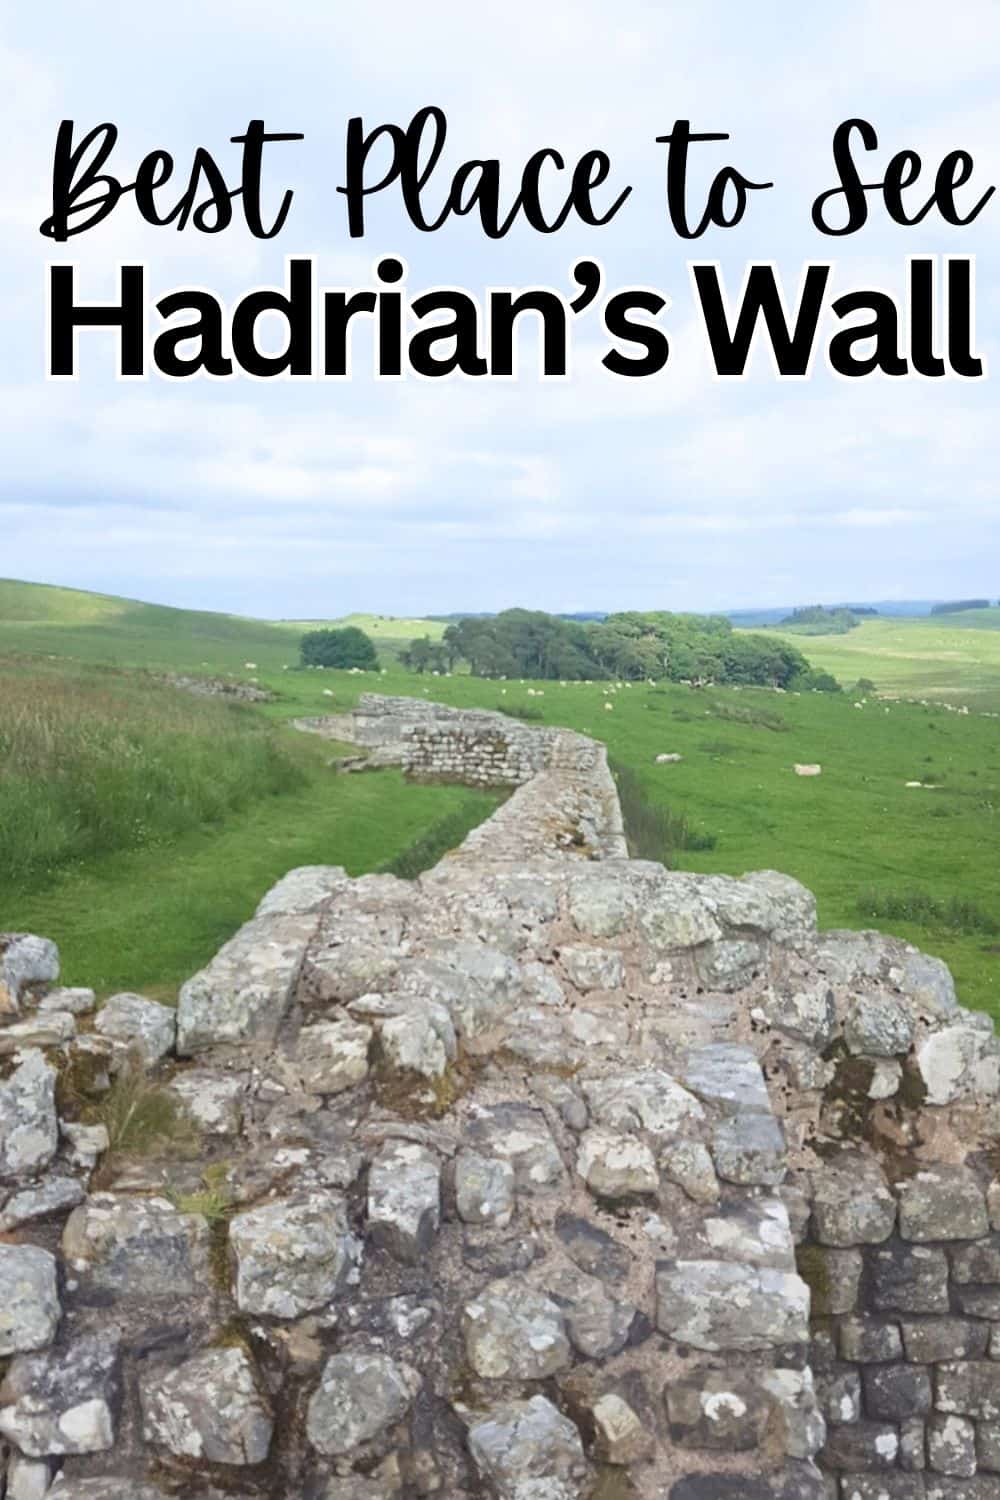 Why Housesteads Roman Fort is the Best Place to See Hadrian's Wall